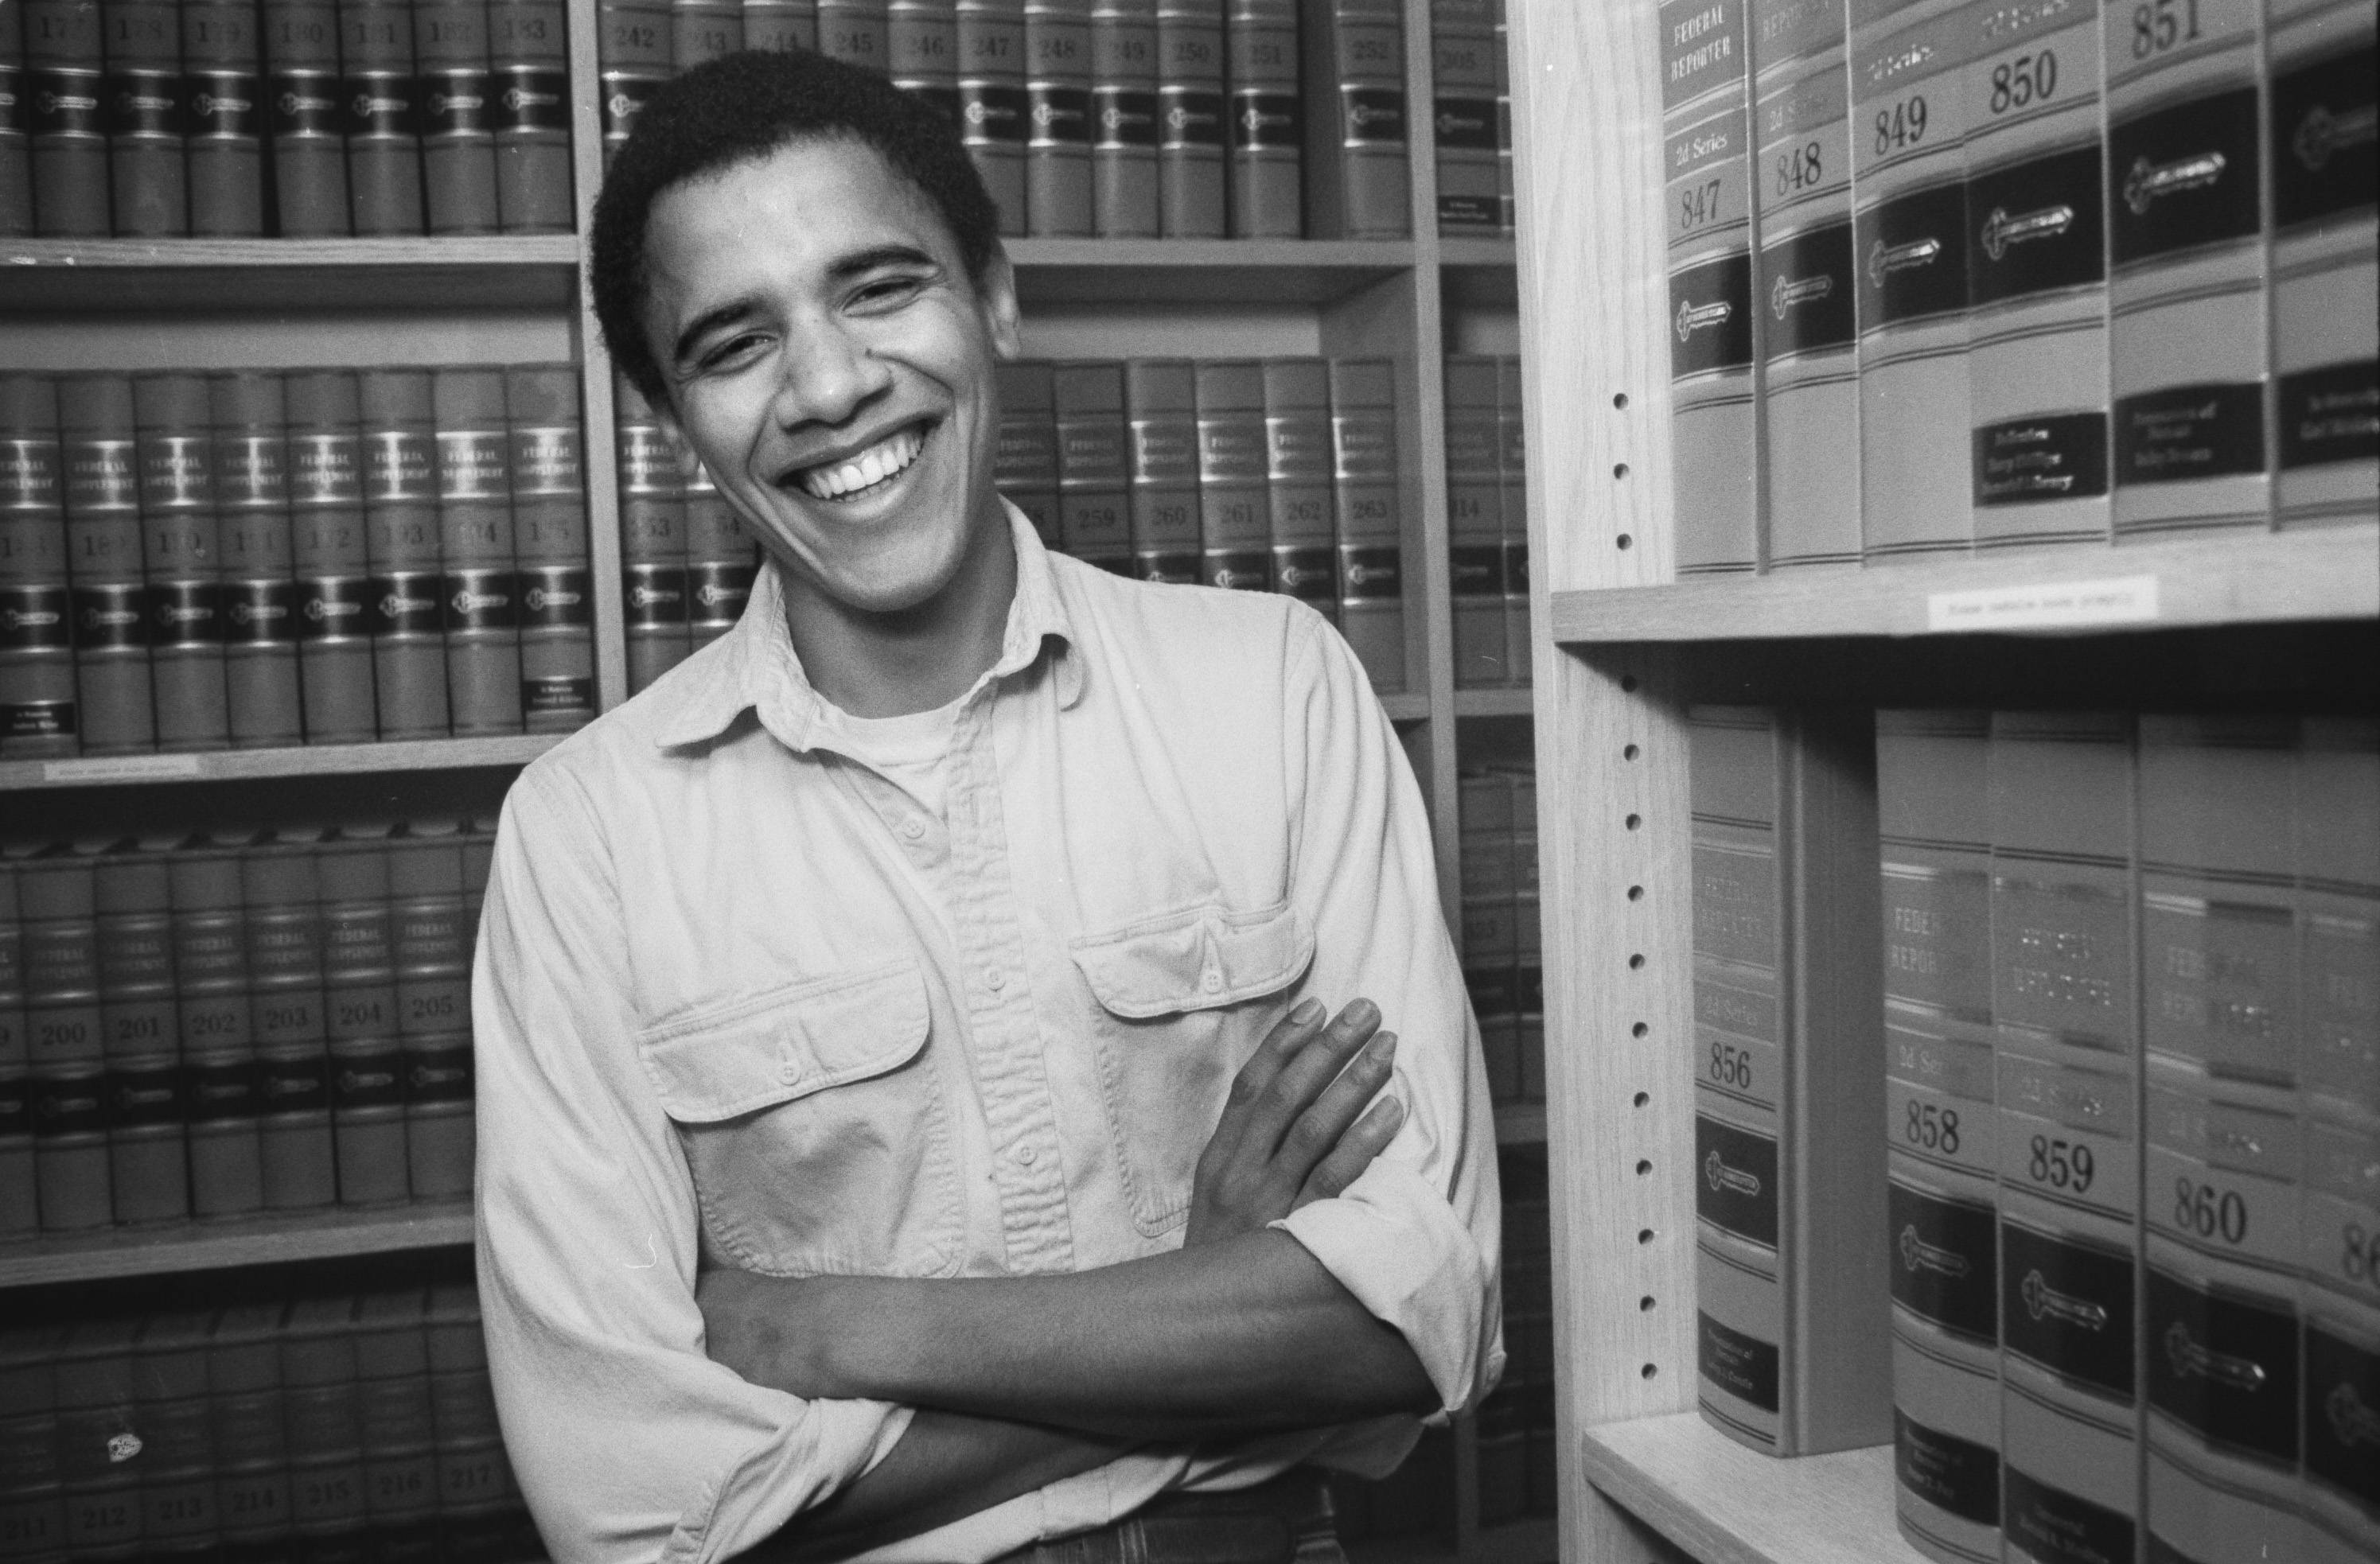 Barack Obama, graduate of Harvard Law School '91, is photographed on campus after was named head of the Harvard Law Review in 1990. (Photo by Joe Wrinn/Harvard University/Corbis via Getty Images)